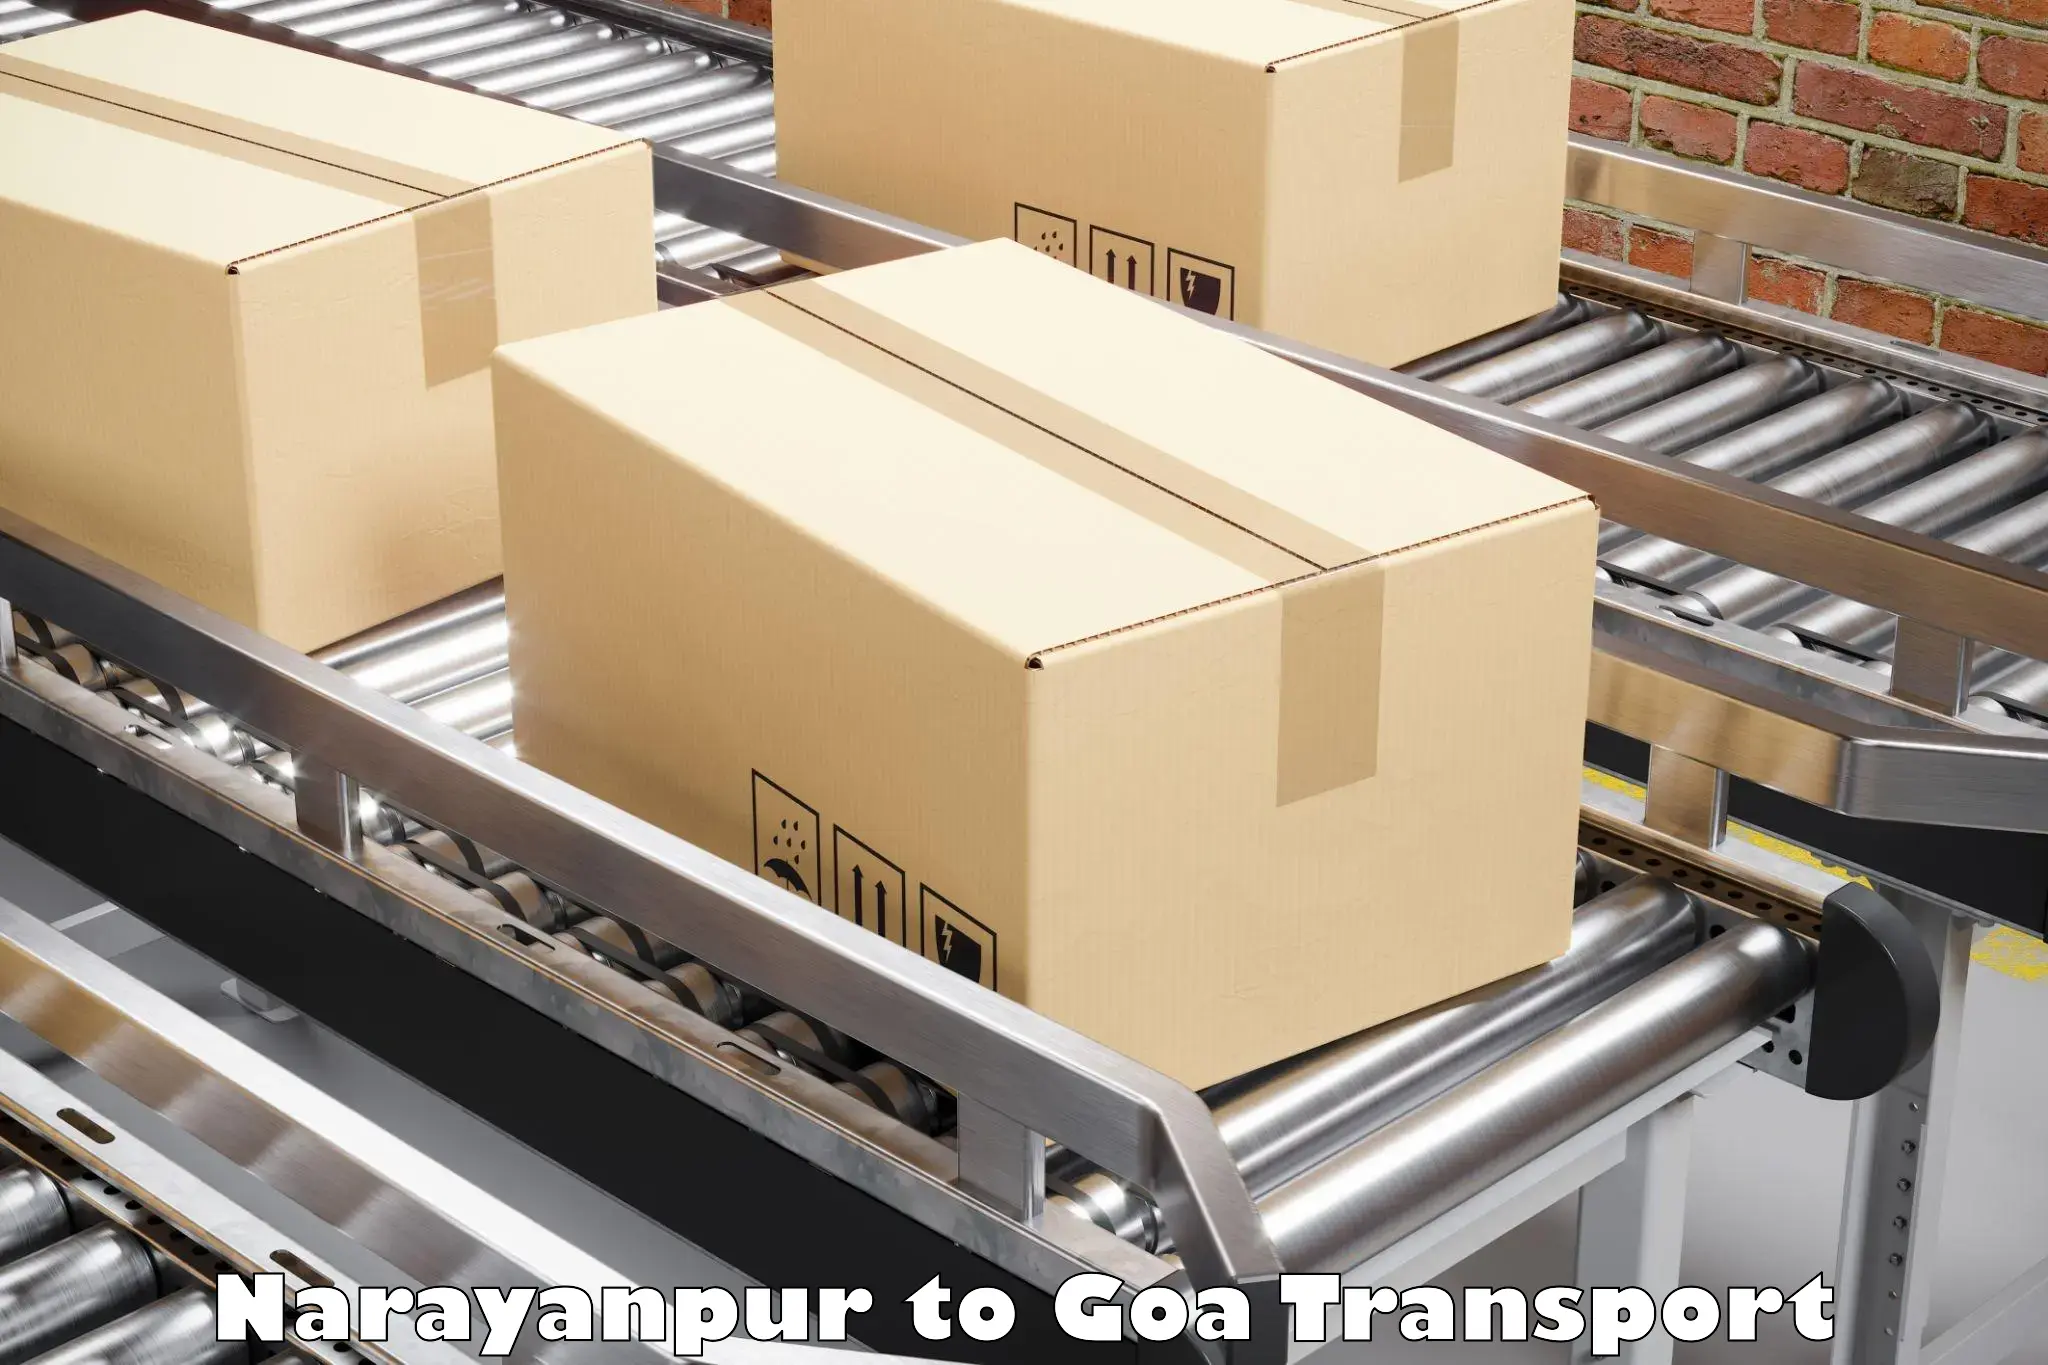 Pick up transport service in Narayanpur to Panaji